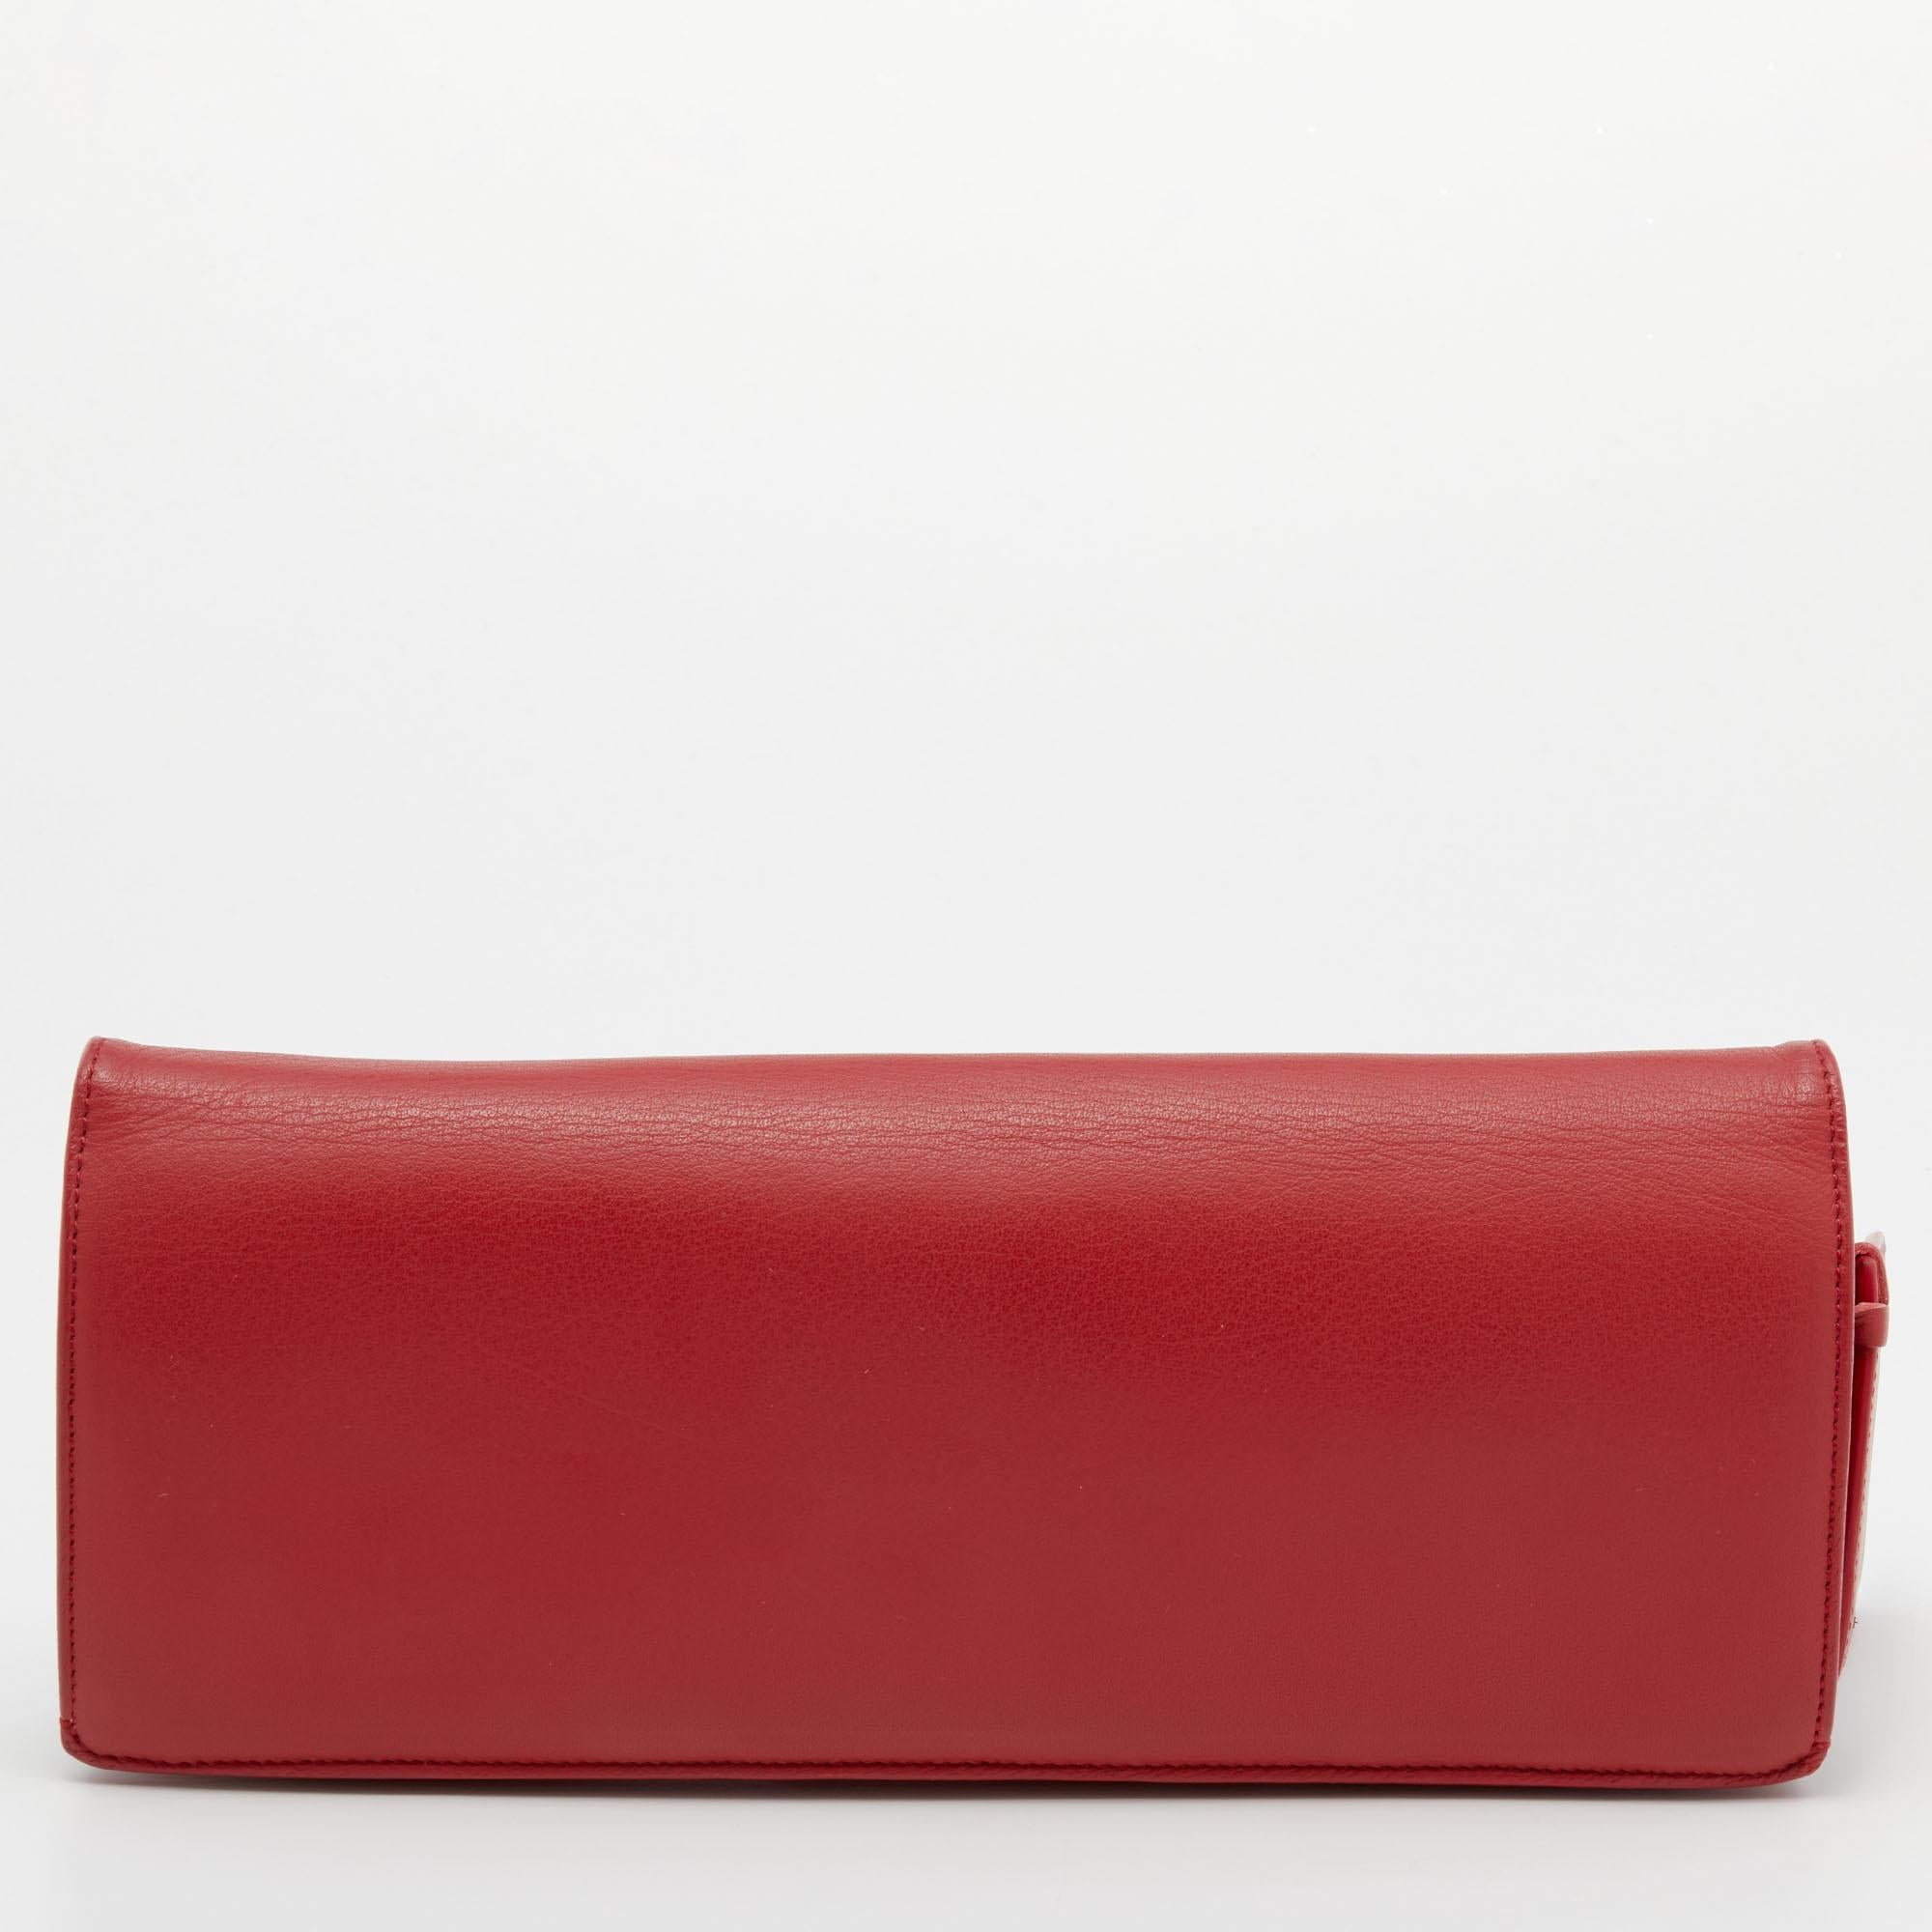 The functional silhouette of this Balenciaga clutch makes it easy to carry around. Created from leather, it exhibits a front zipper pocket, brass-tone accents, and a compartmentalized interior.

Includes: Original Dustbag, Mirror
